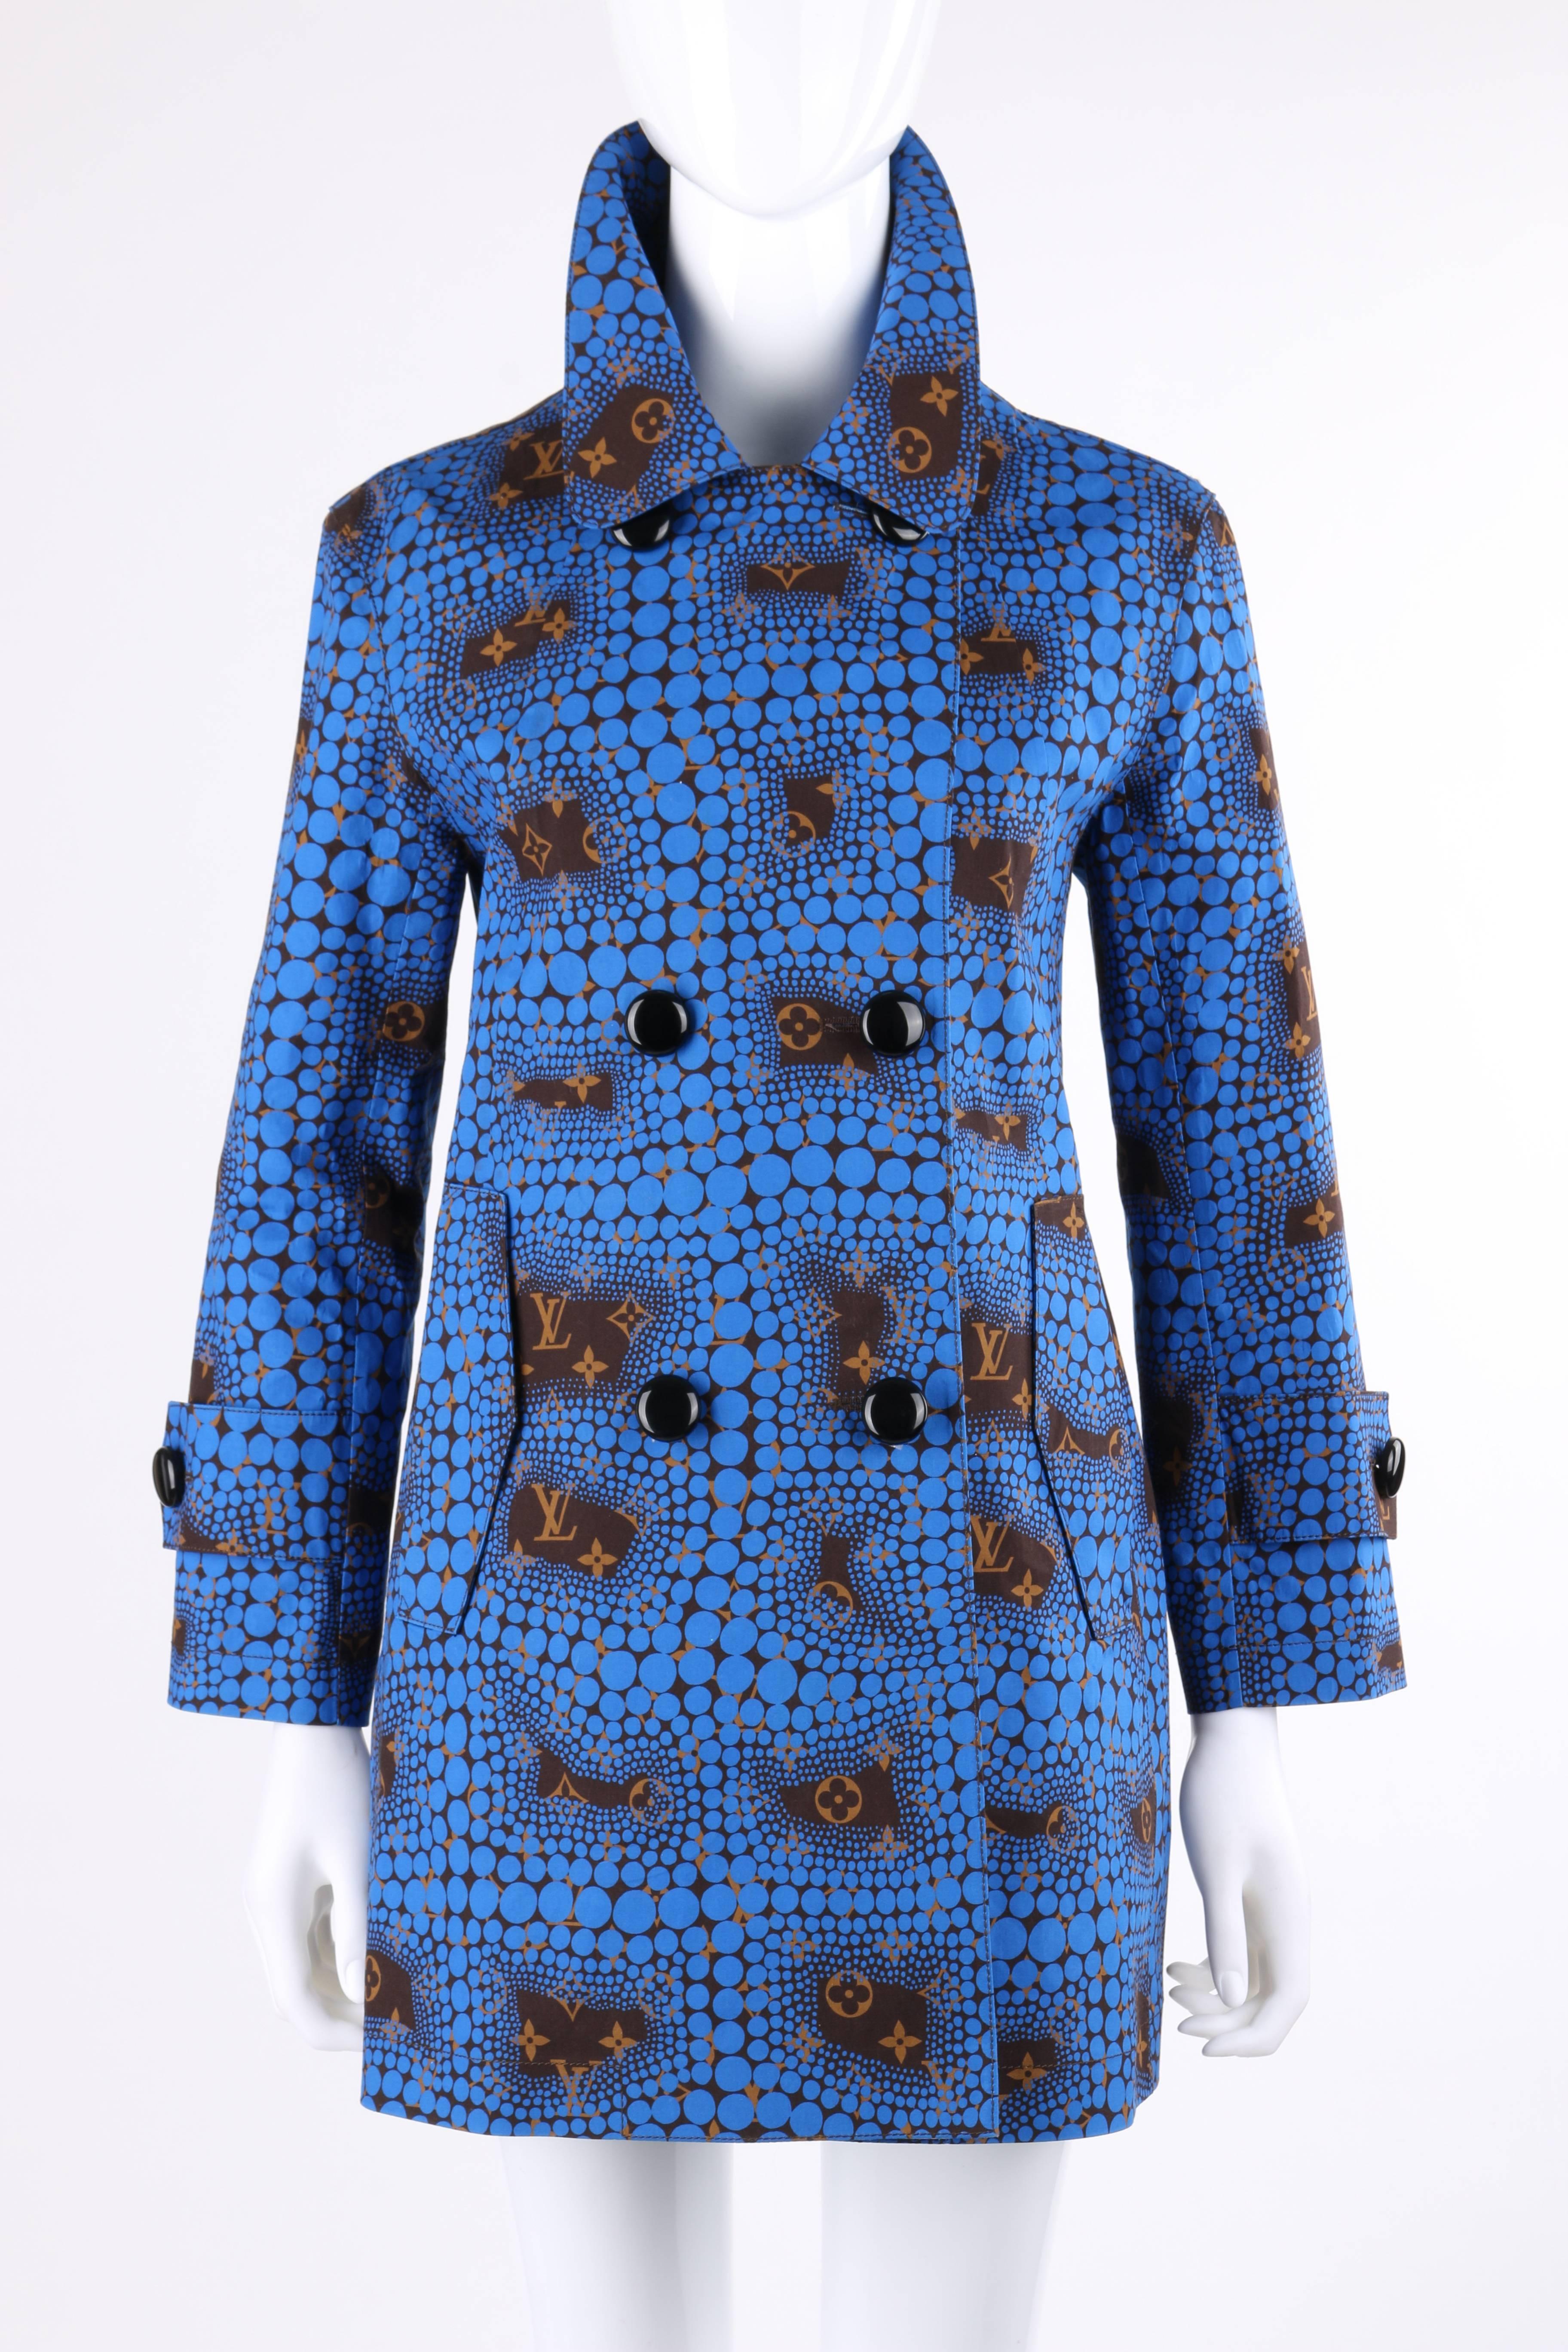 Rare Louis Vuitton Limited Edition c.2012 blue "monogram town" polka dot trench coat designed as a collaboration by Yayoi Kusama and Marc Jacobs. True blue abstract polka dot over brown signature "LV" monogram print cotton. Long